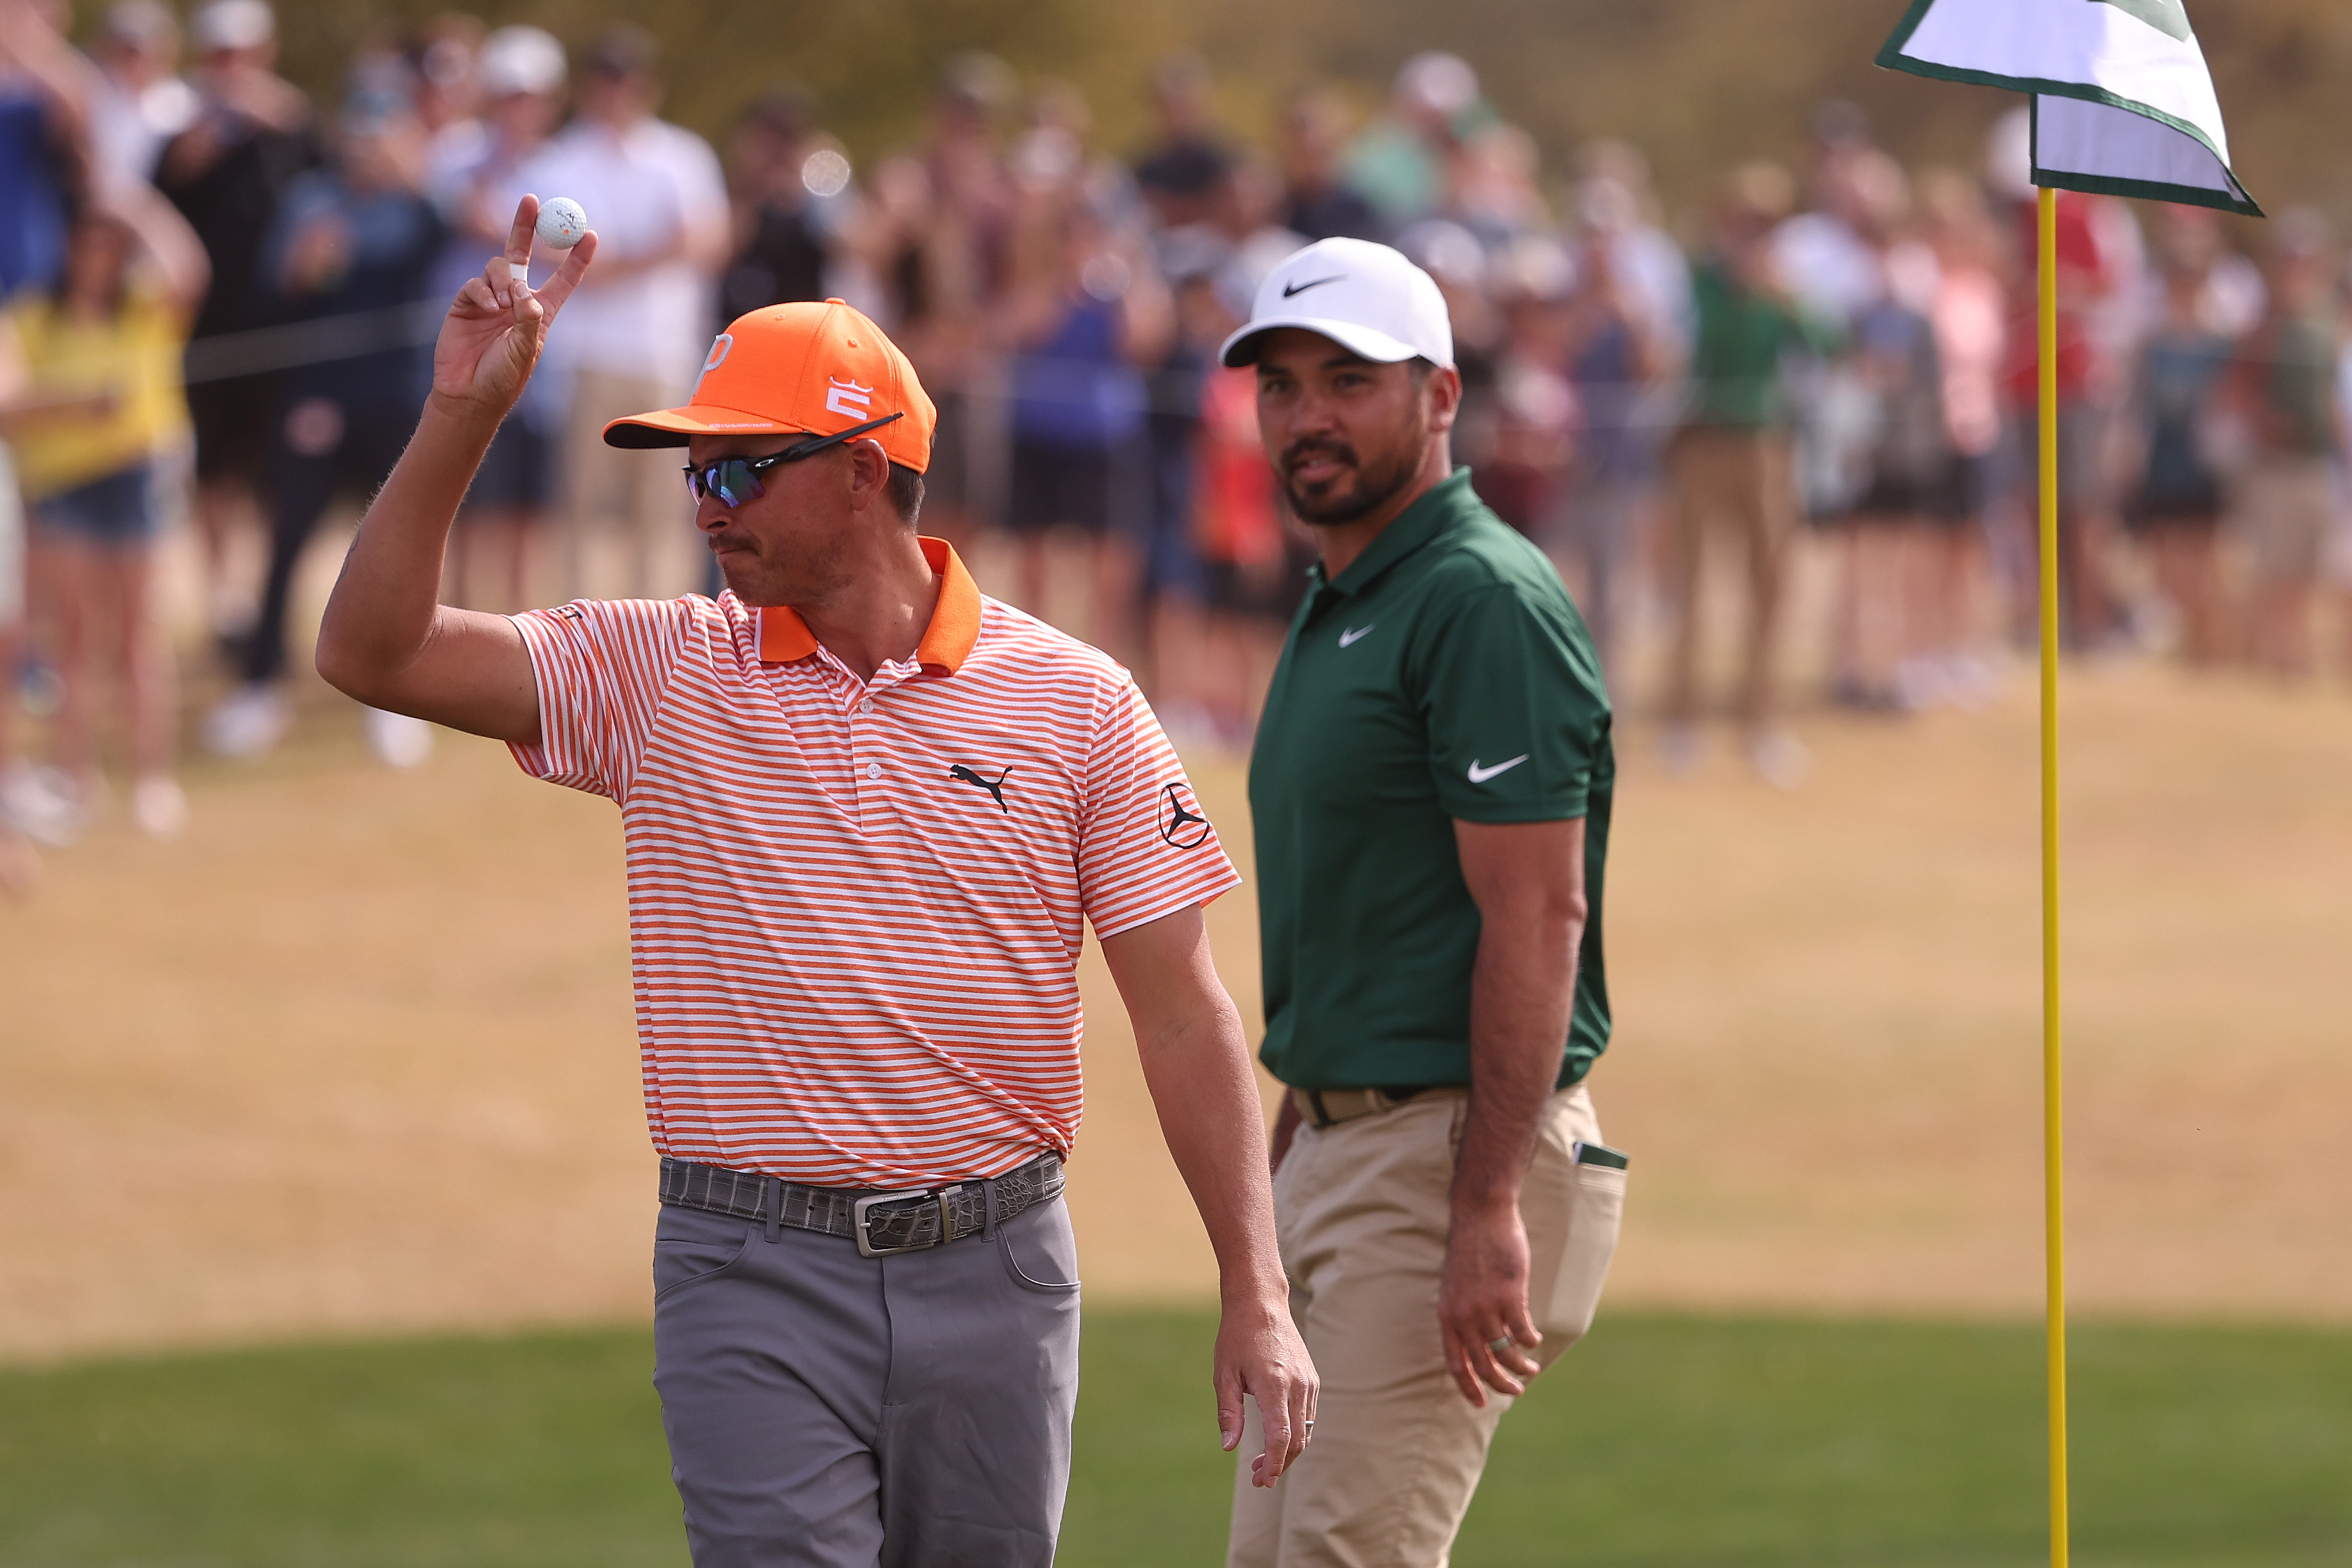 Rickie Fowler Makes Hole-In-One At Waste Management Phoenix Open | Golf ...